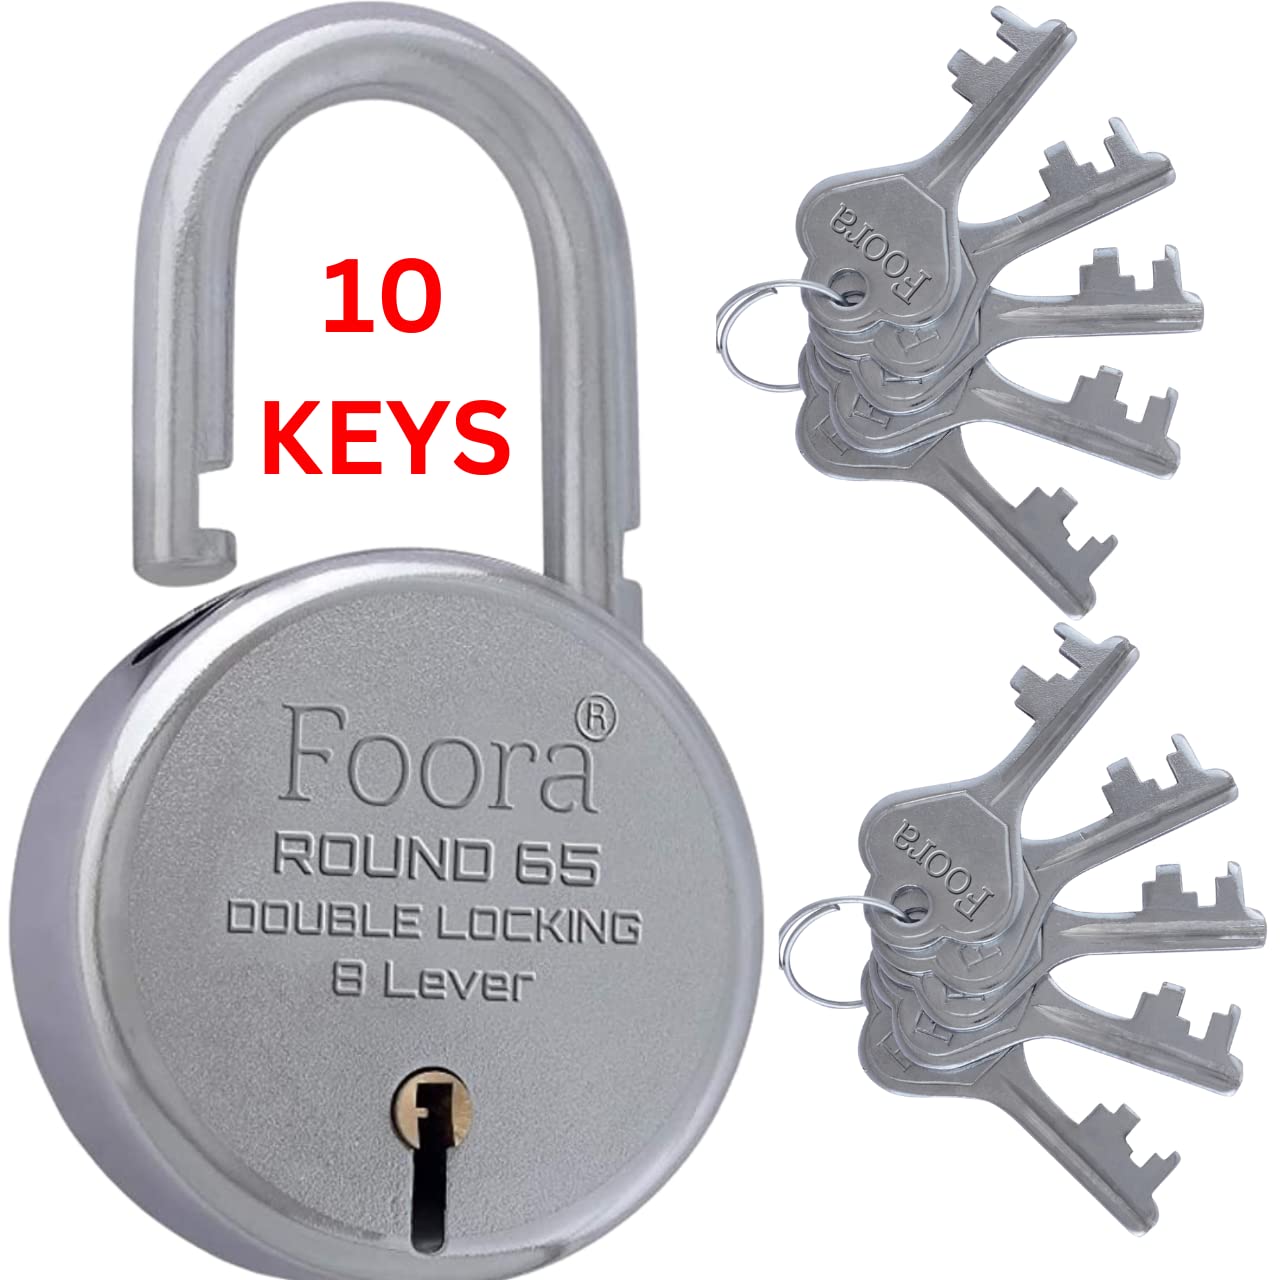 Foora Lock and Keys Door Lock for Home Round 65mm Padlock with 10 Keys Double Locking 8 Lever gate, Shop Shutter Good for Rental Apartment(10 Keys Round 65mm)